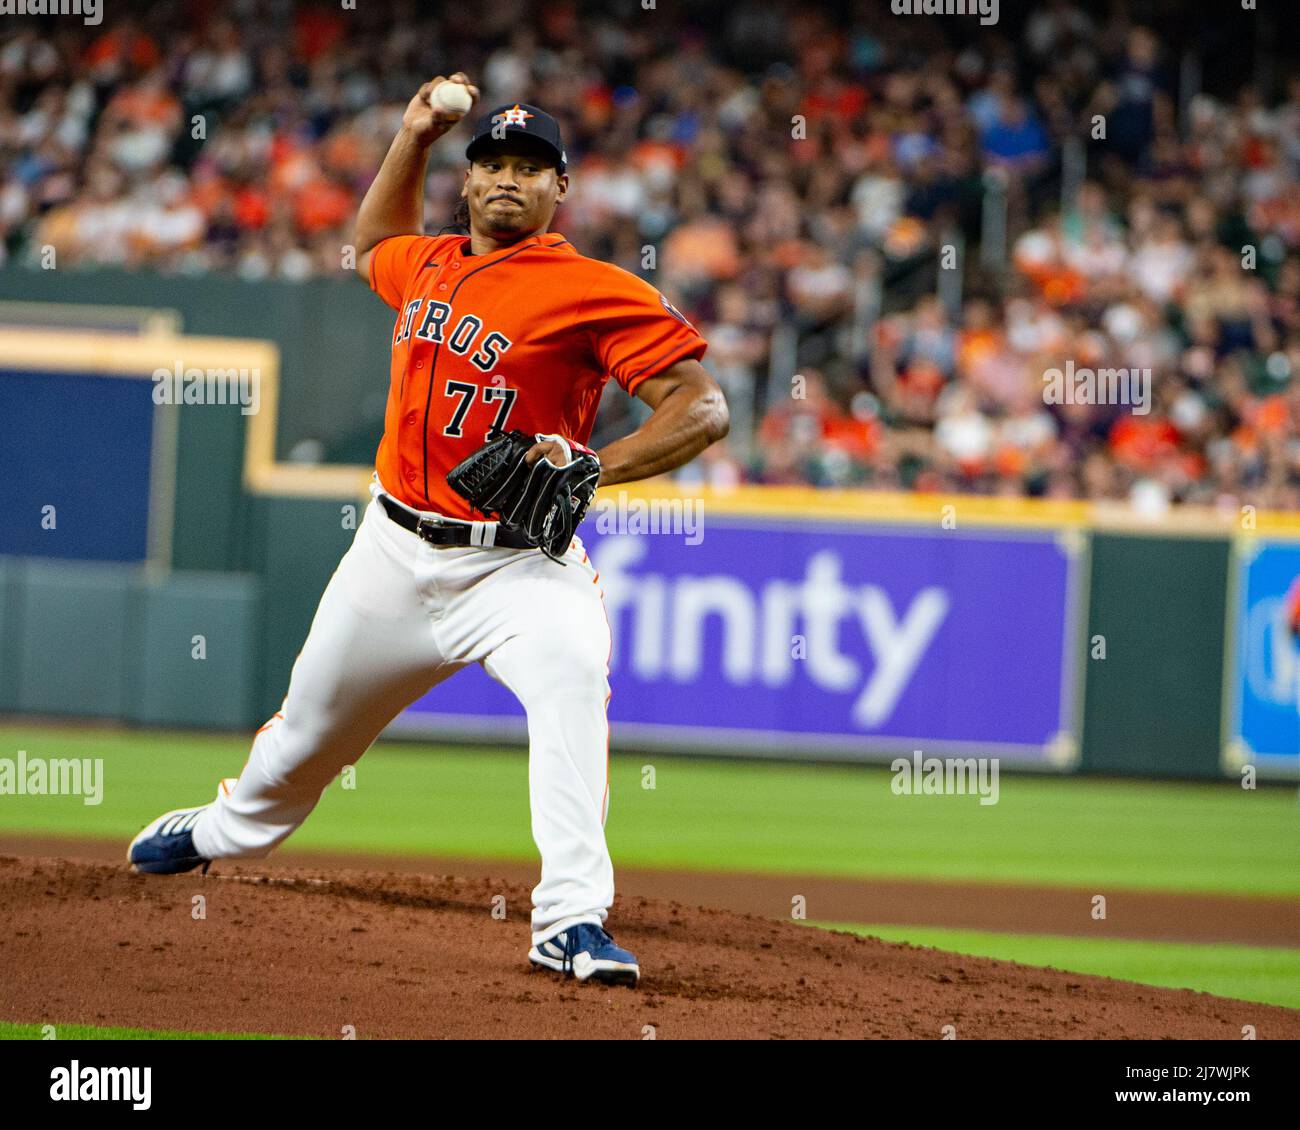 Houston, United States. 06th May, 2022. Houston Astros starting pitcher Luis  Garcia (77) pitches during the second inning of the MLB game between the  Houston Astros and the Detroit Tigers on Thursday